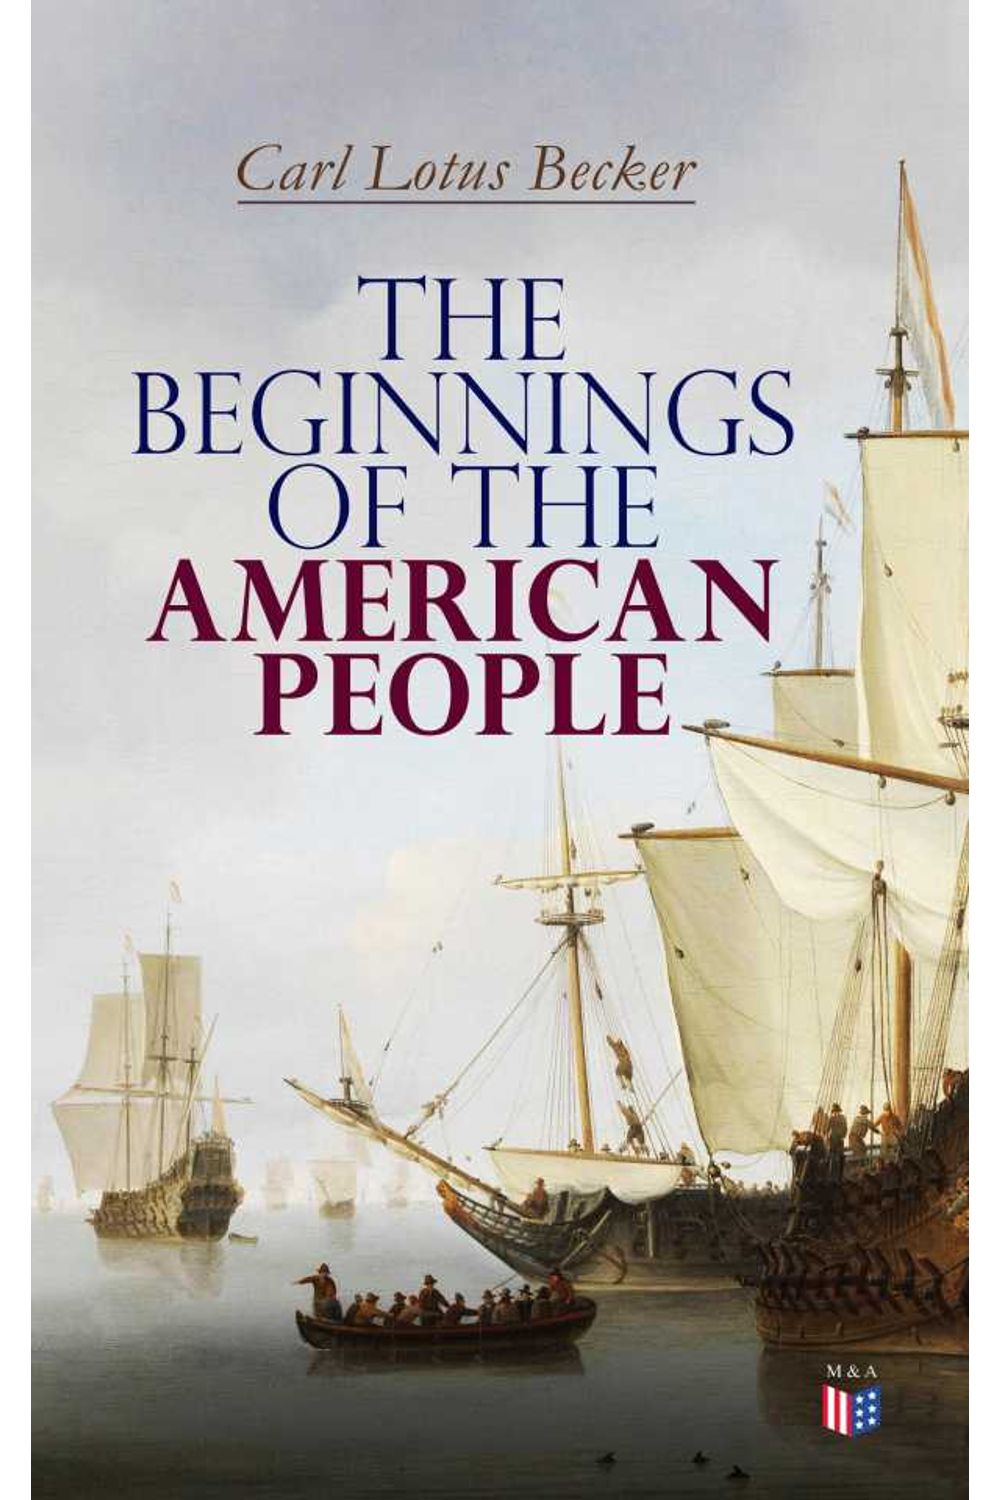 bw-the-beginnings-of-the-american-people-madison-adams-press-9788027304387